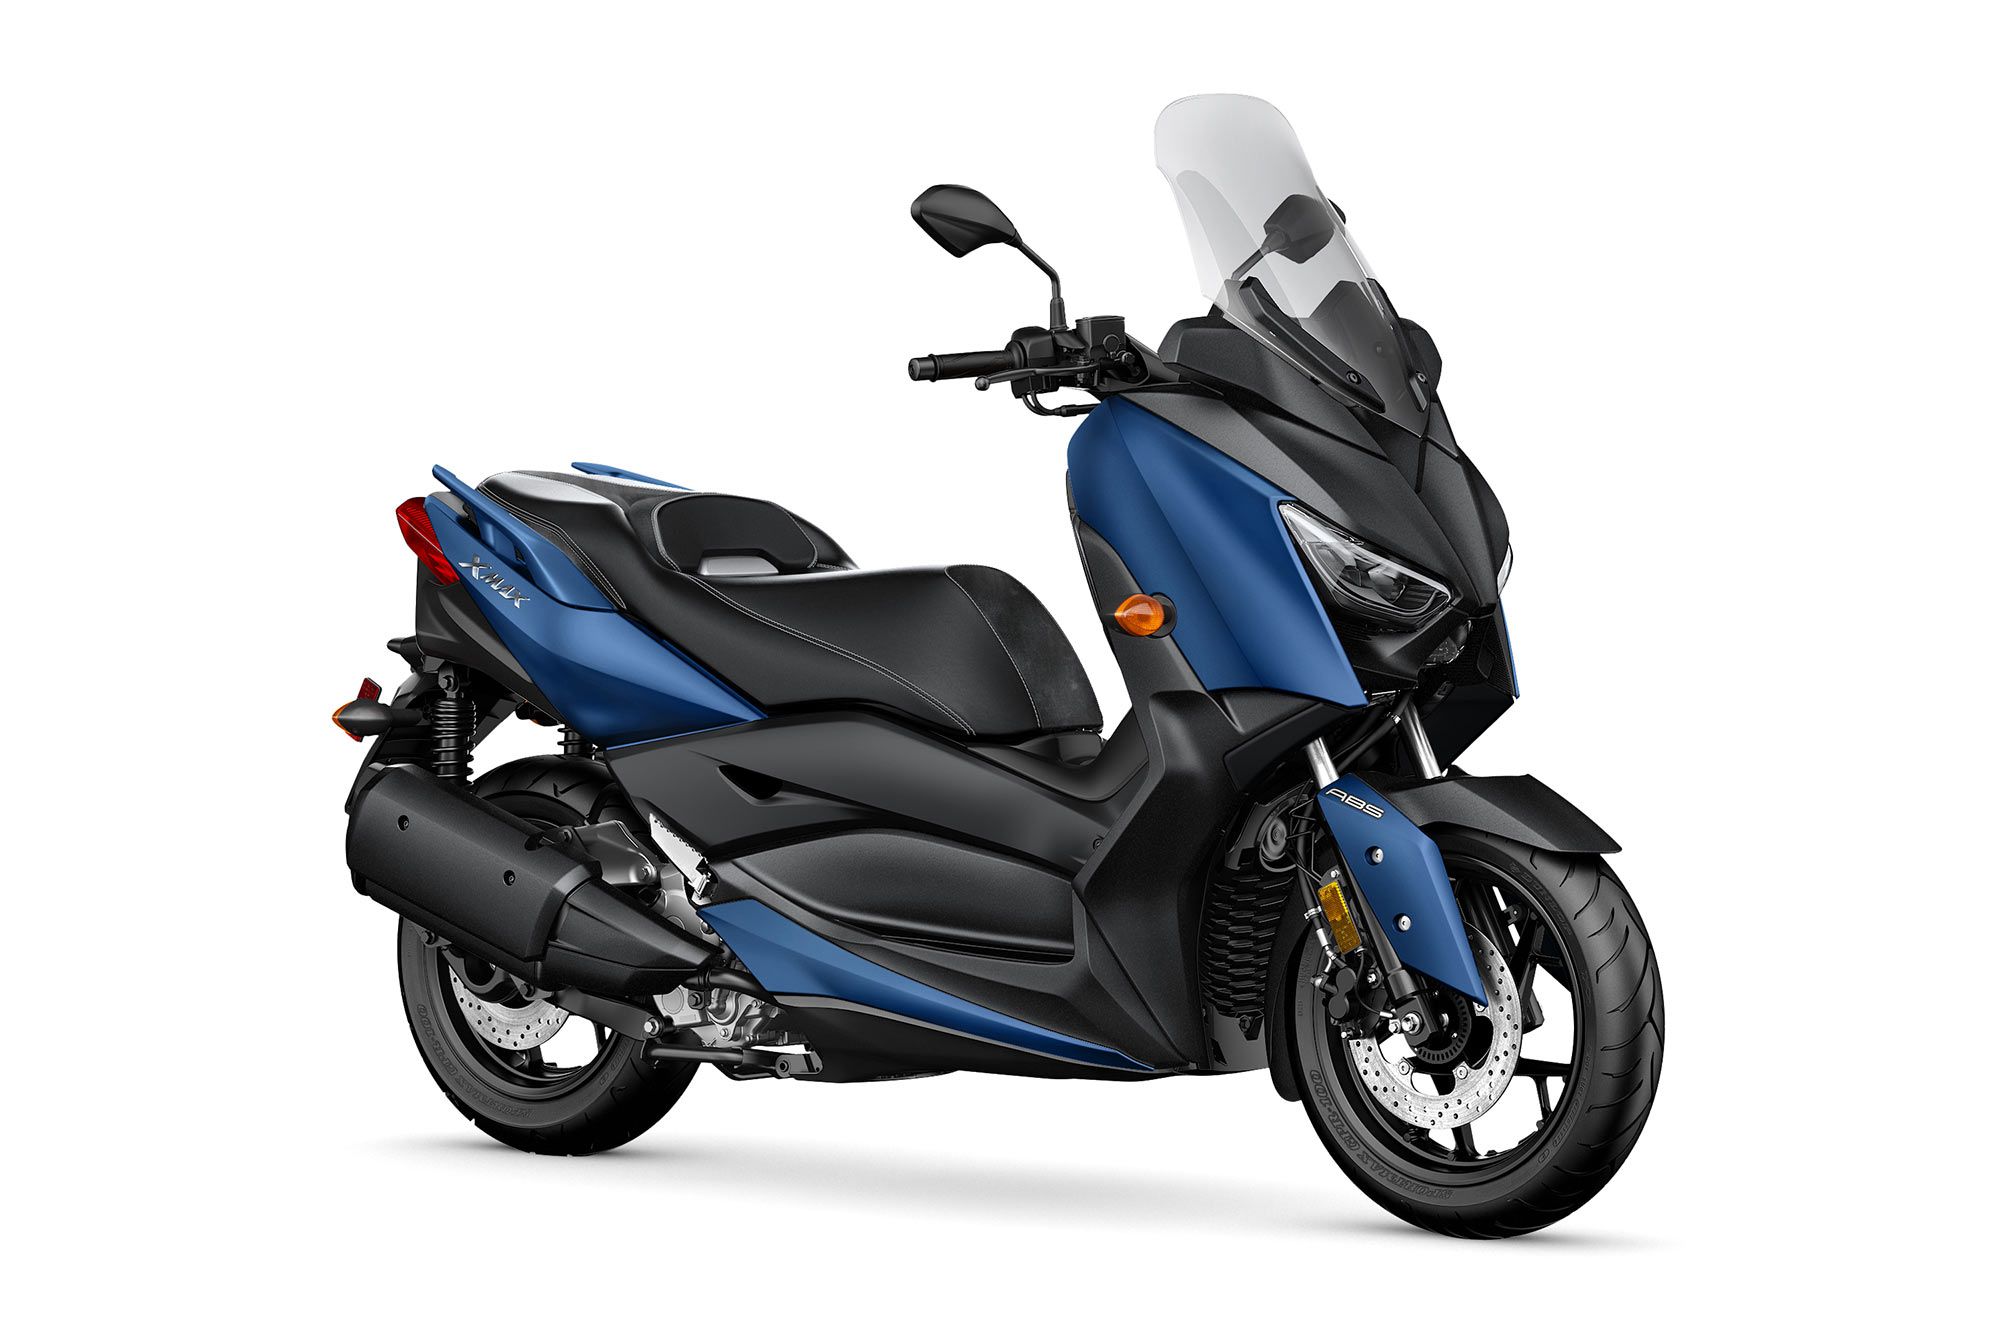 Yamaha’s XMAX scooter is another maxi option that can easily accommodate a passenger.